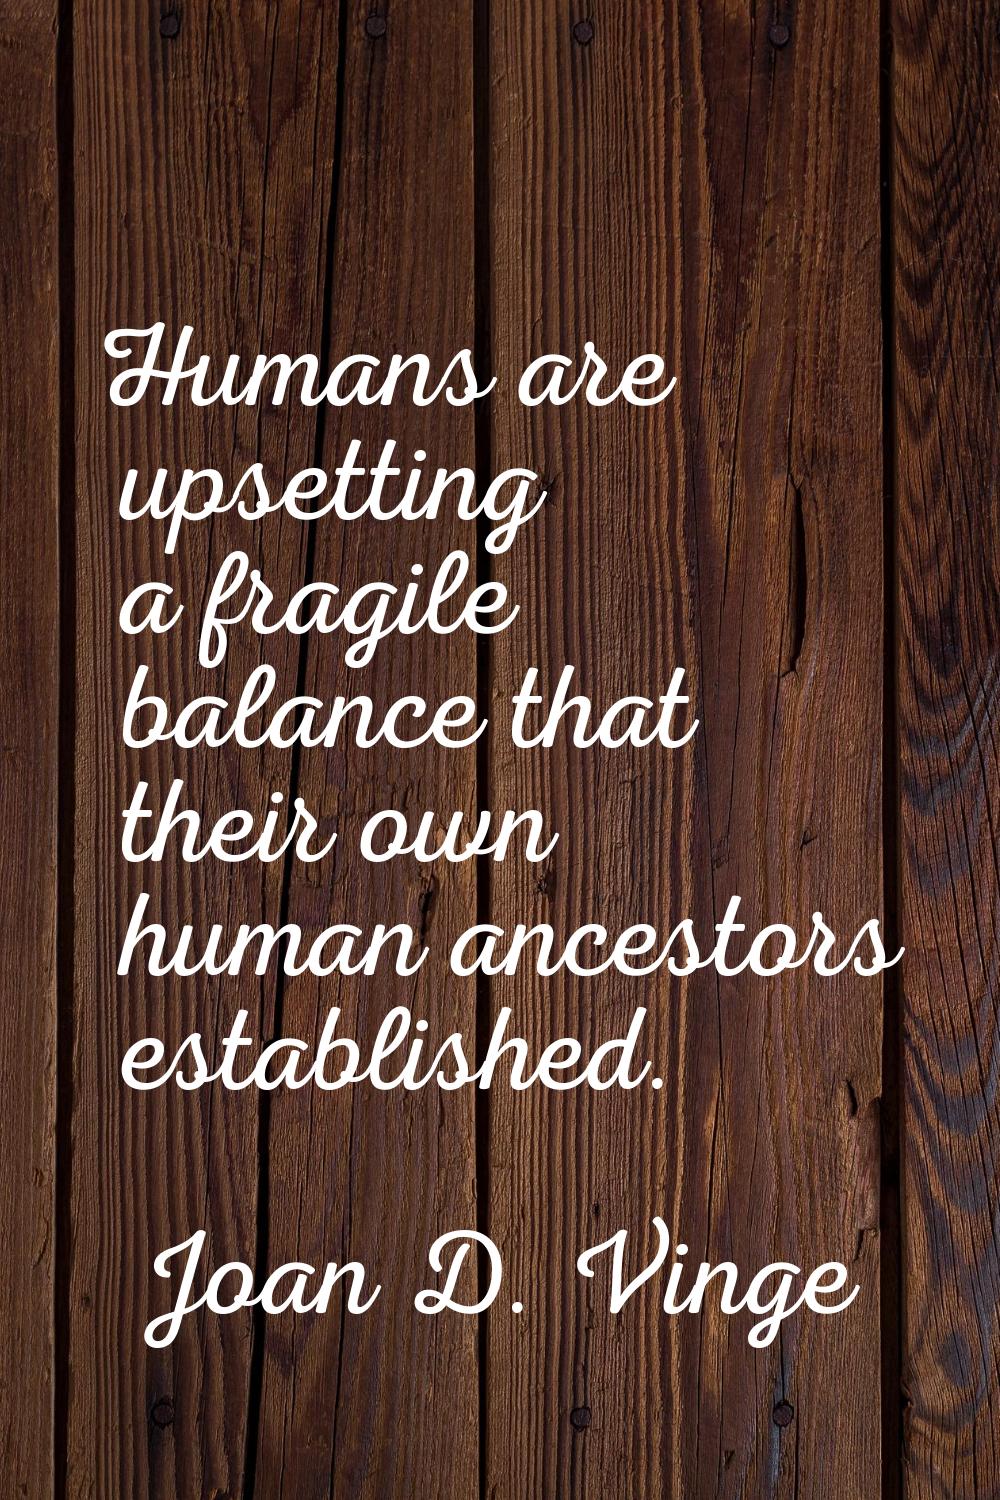 Humans are upsetting a fragile balance that their own human ancestors established.